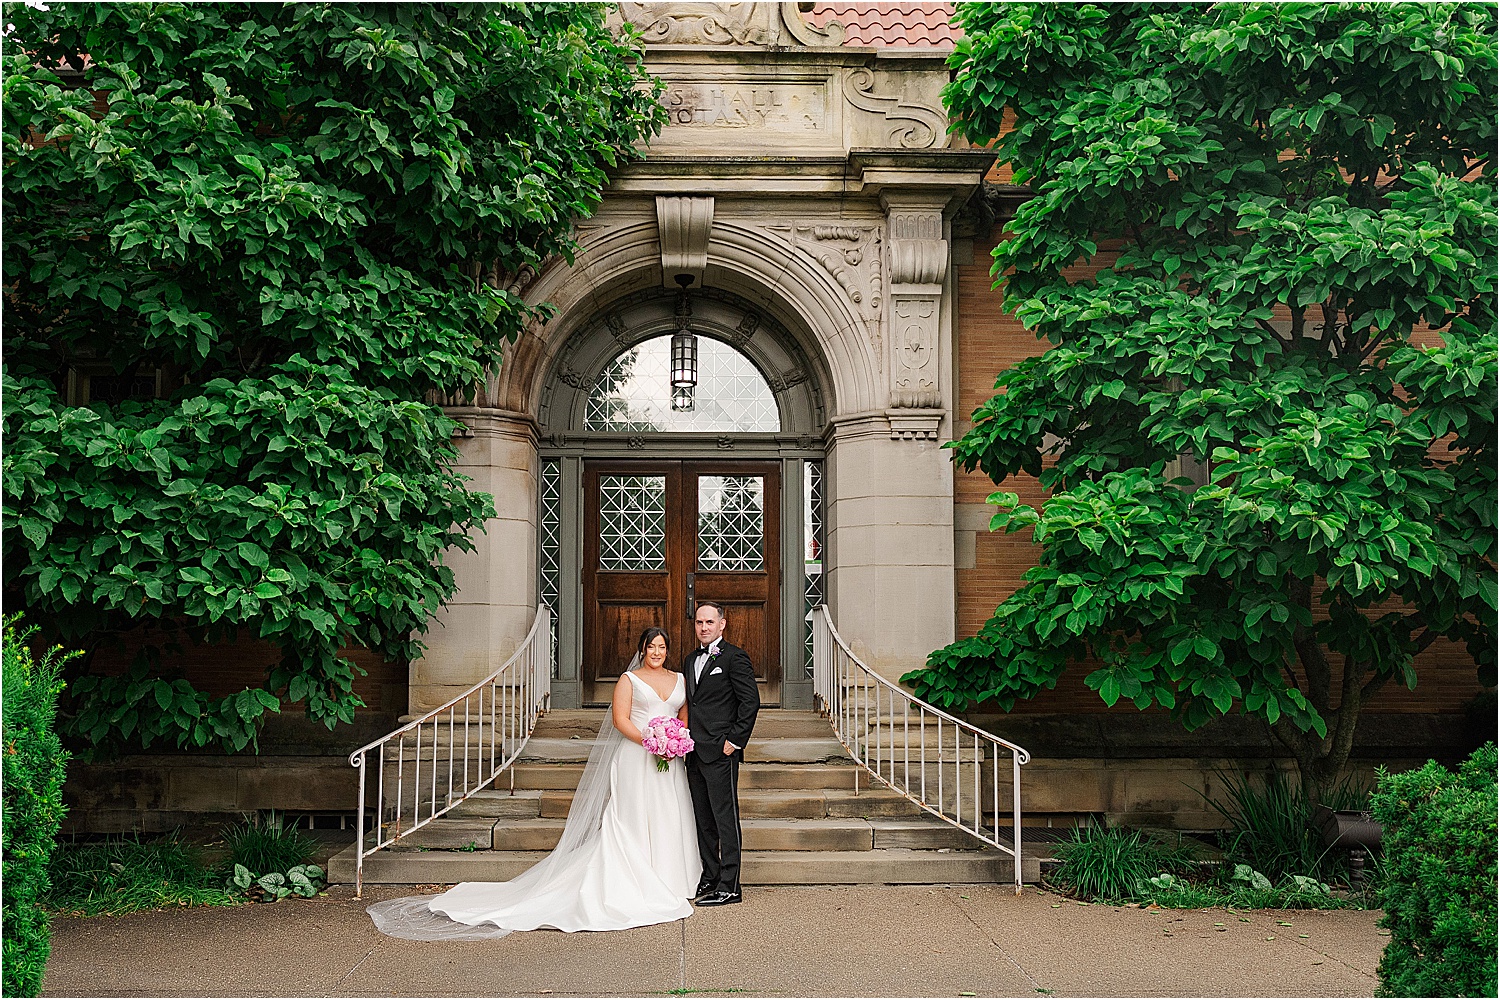 wedding photo at phipps botany hall • Wild Weather - Love at a Phipps Conservatory Outdoor Garden Wedding